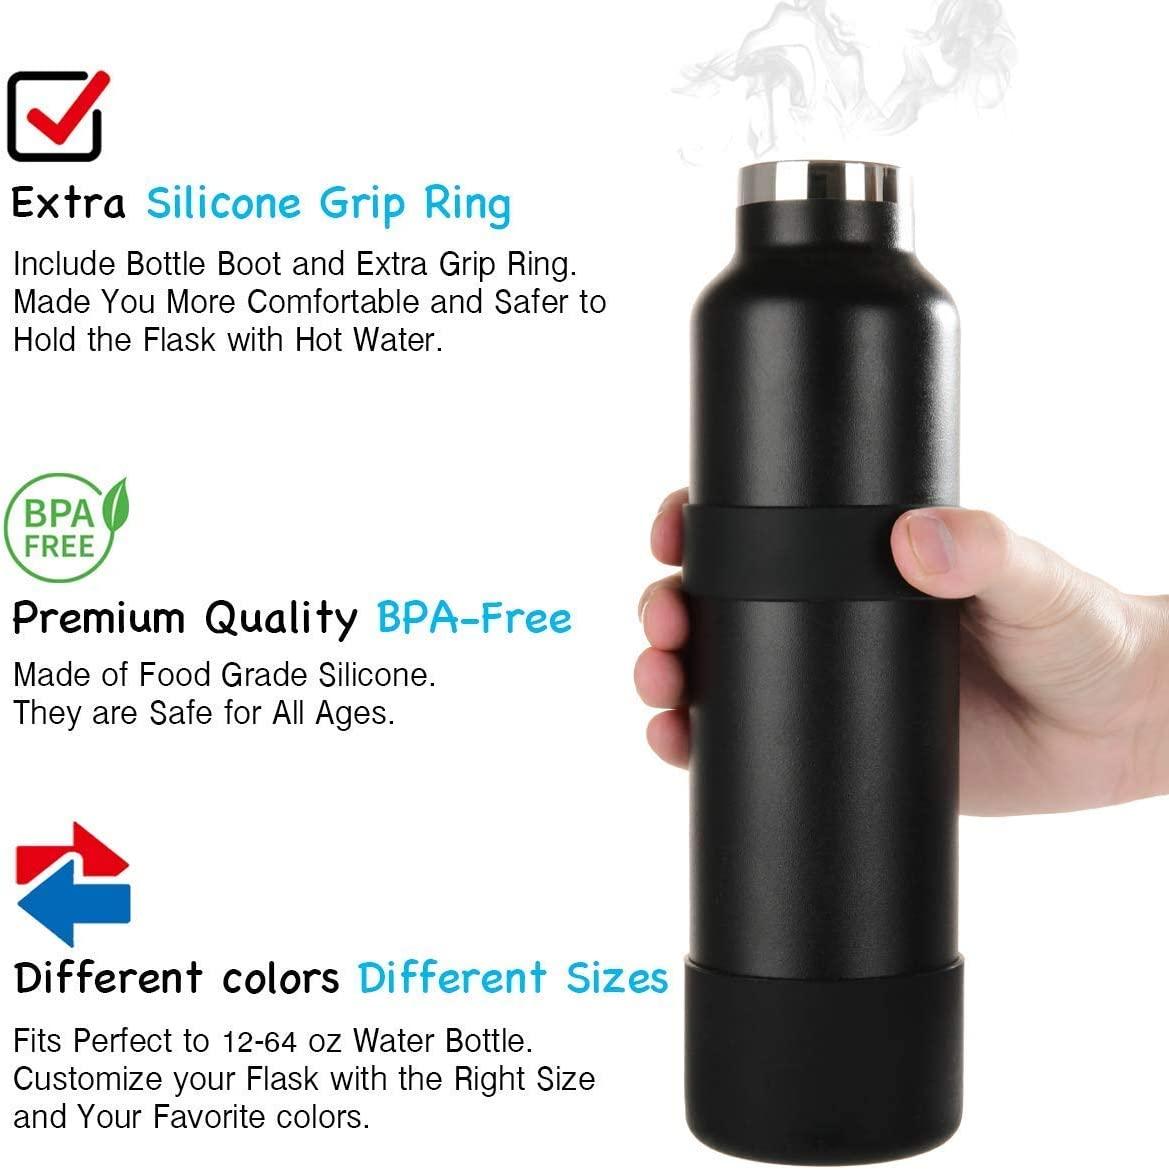 Greant Double Protective Water Bottle Boot Compatible with Hydro